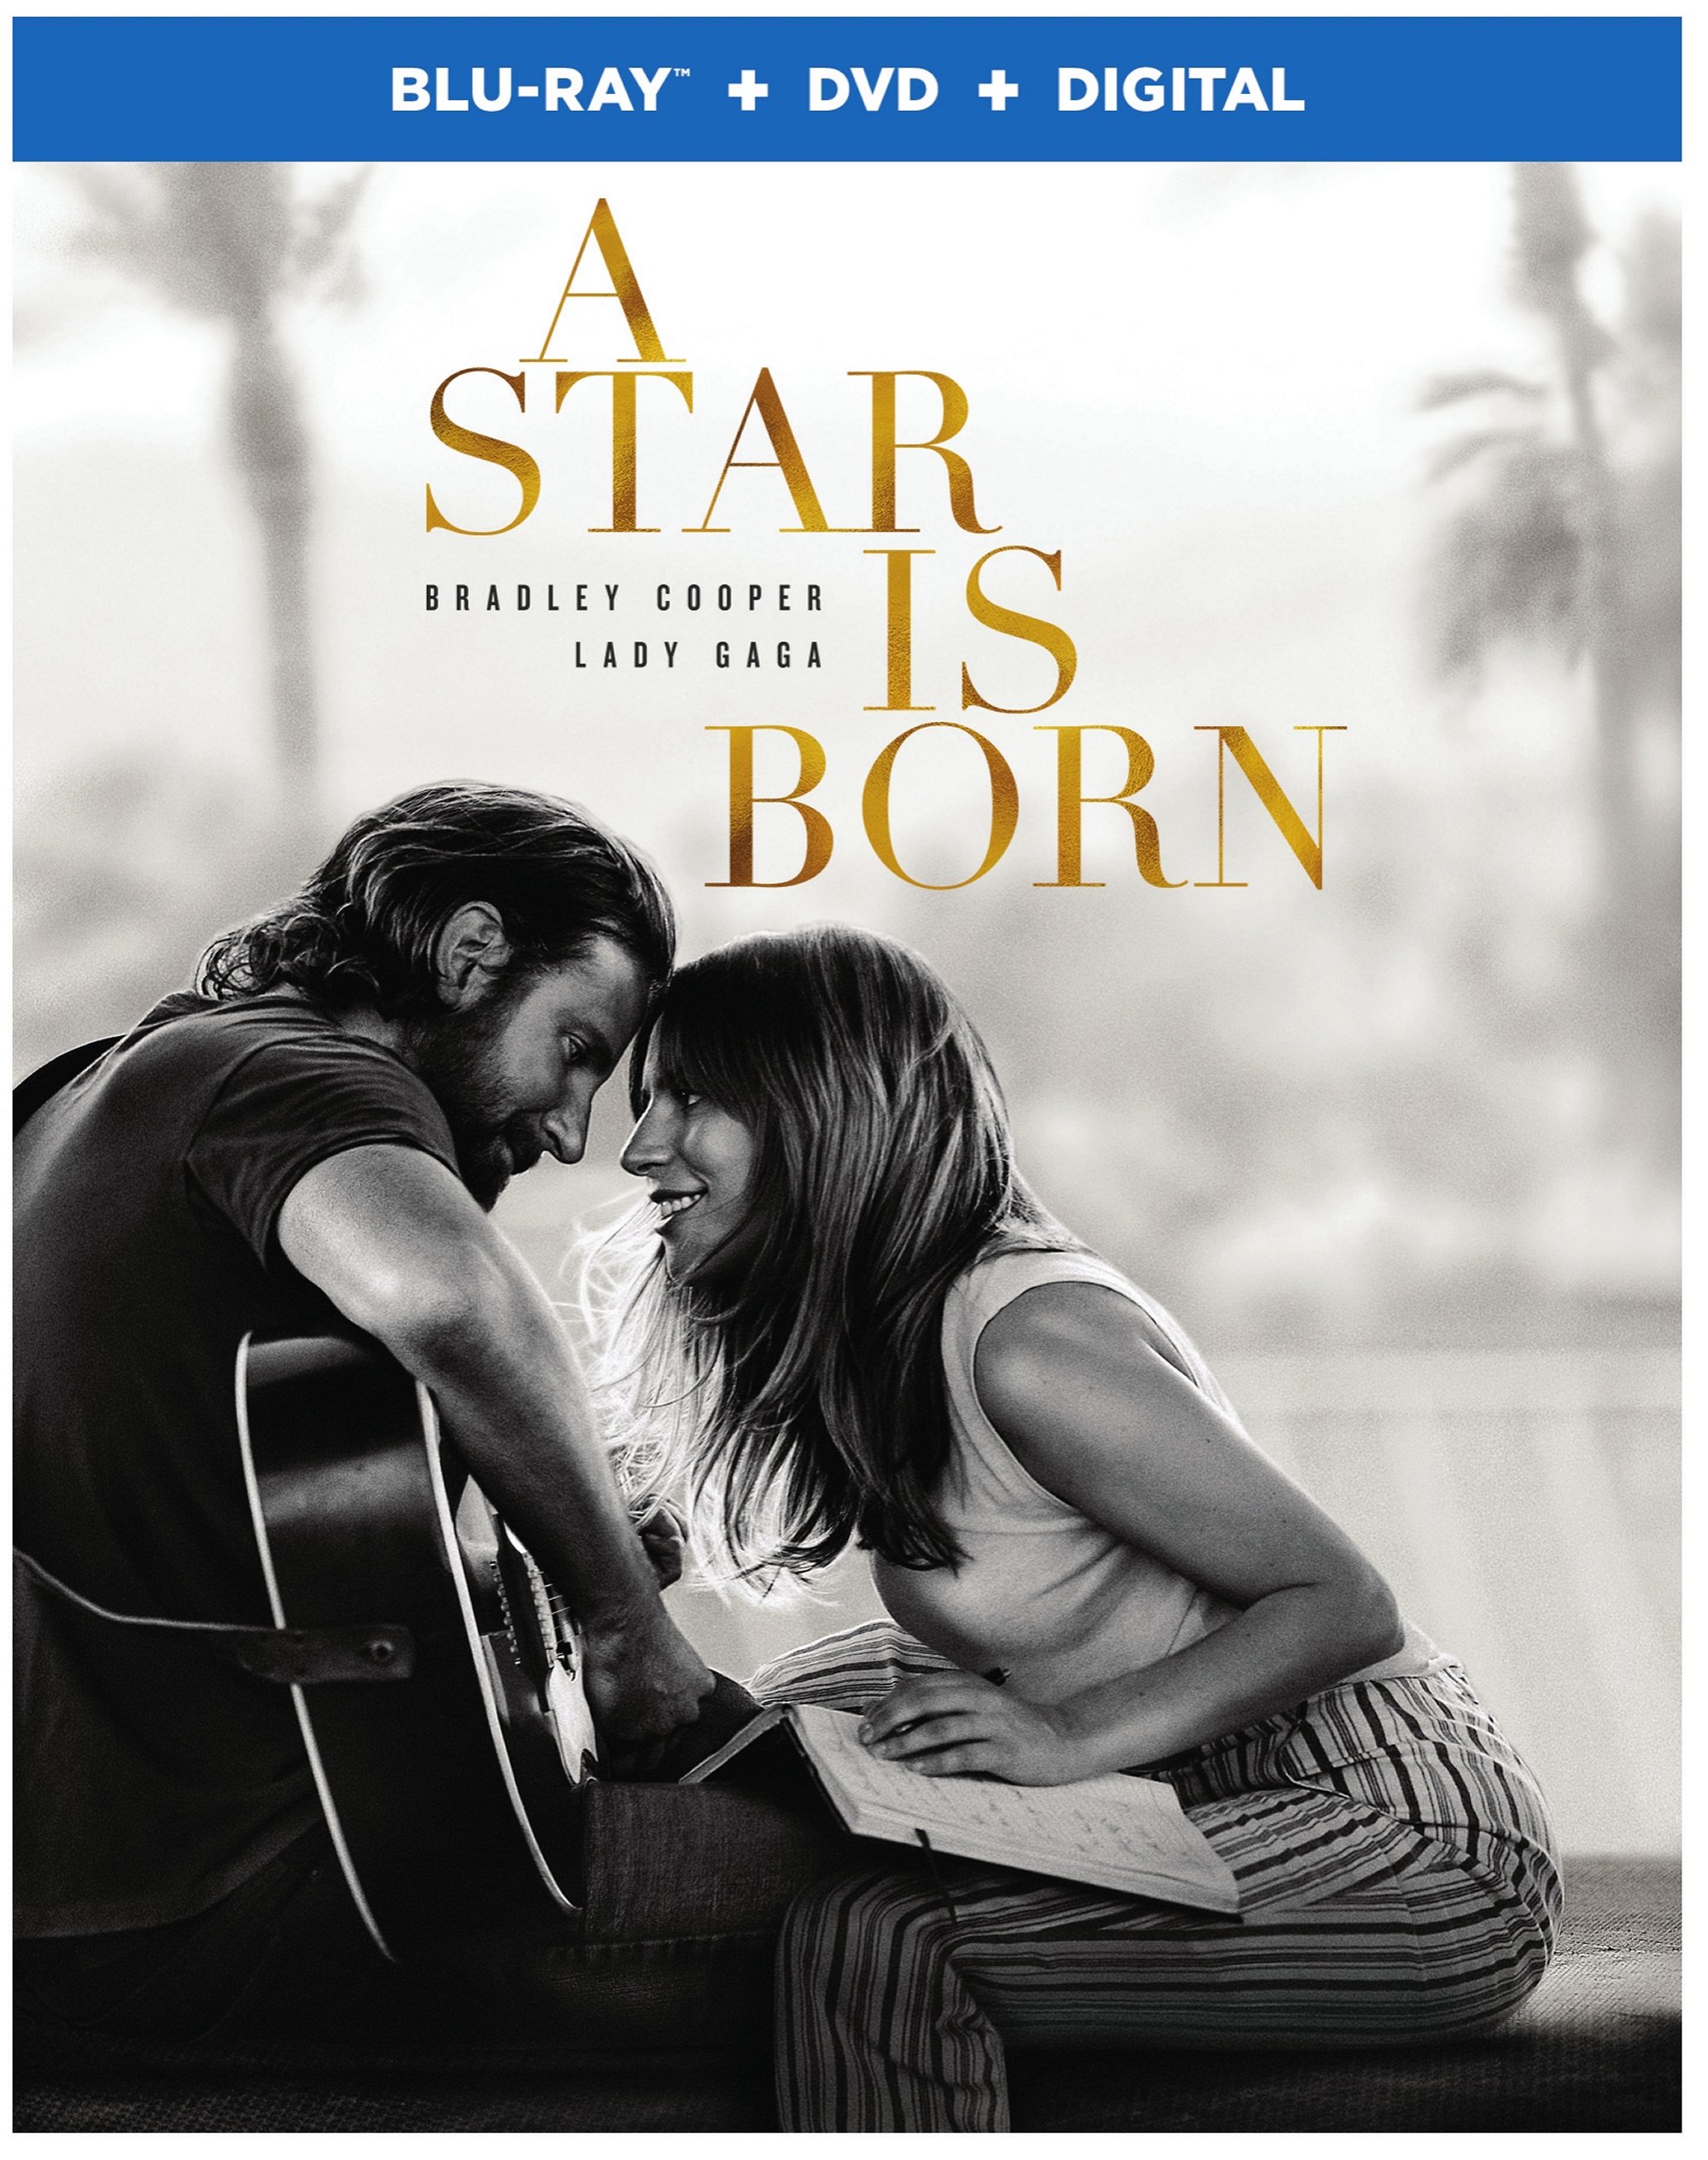 A Star Is Born Blu-Ray Combo Pack cover (Warner Bros. Home Entertainment)